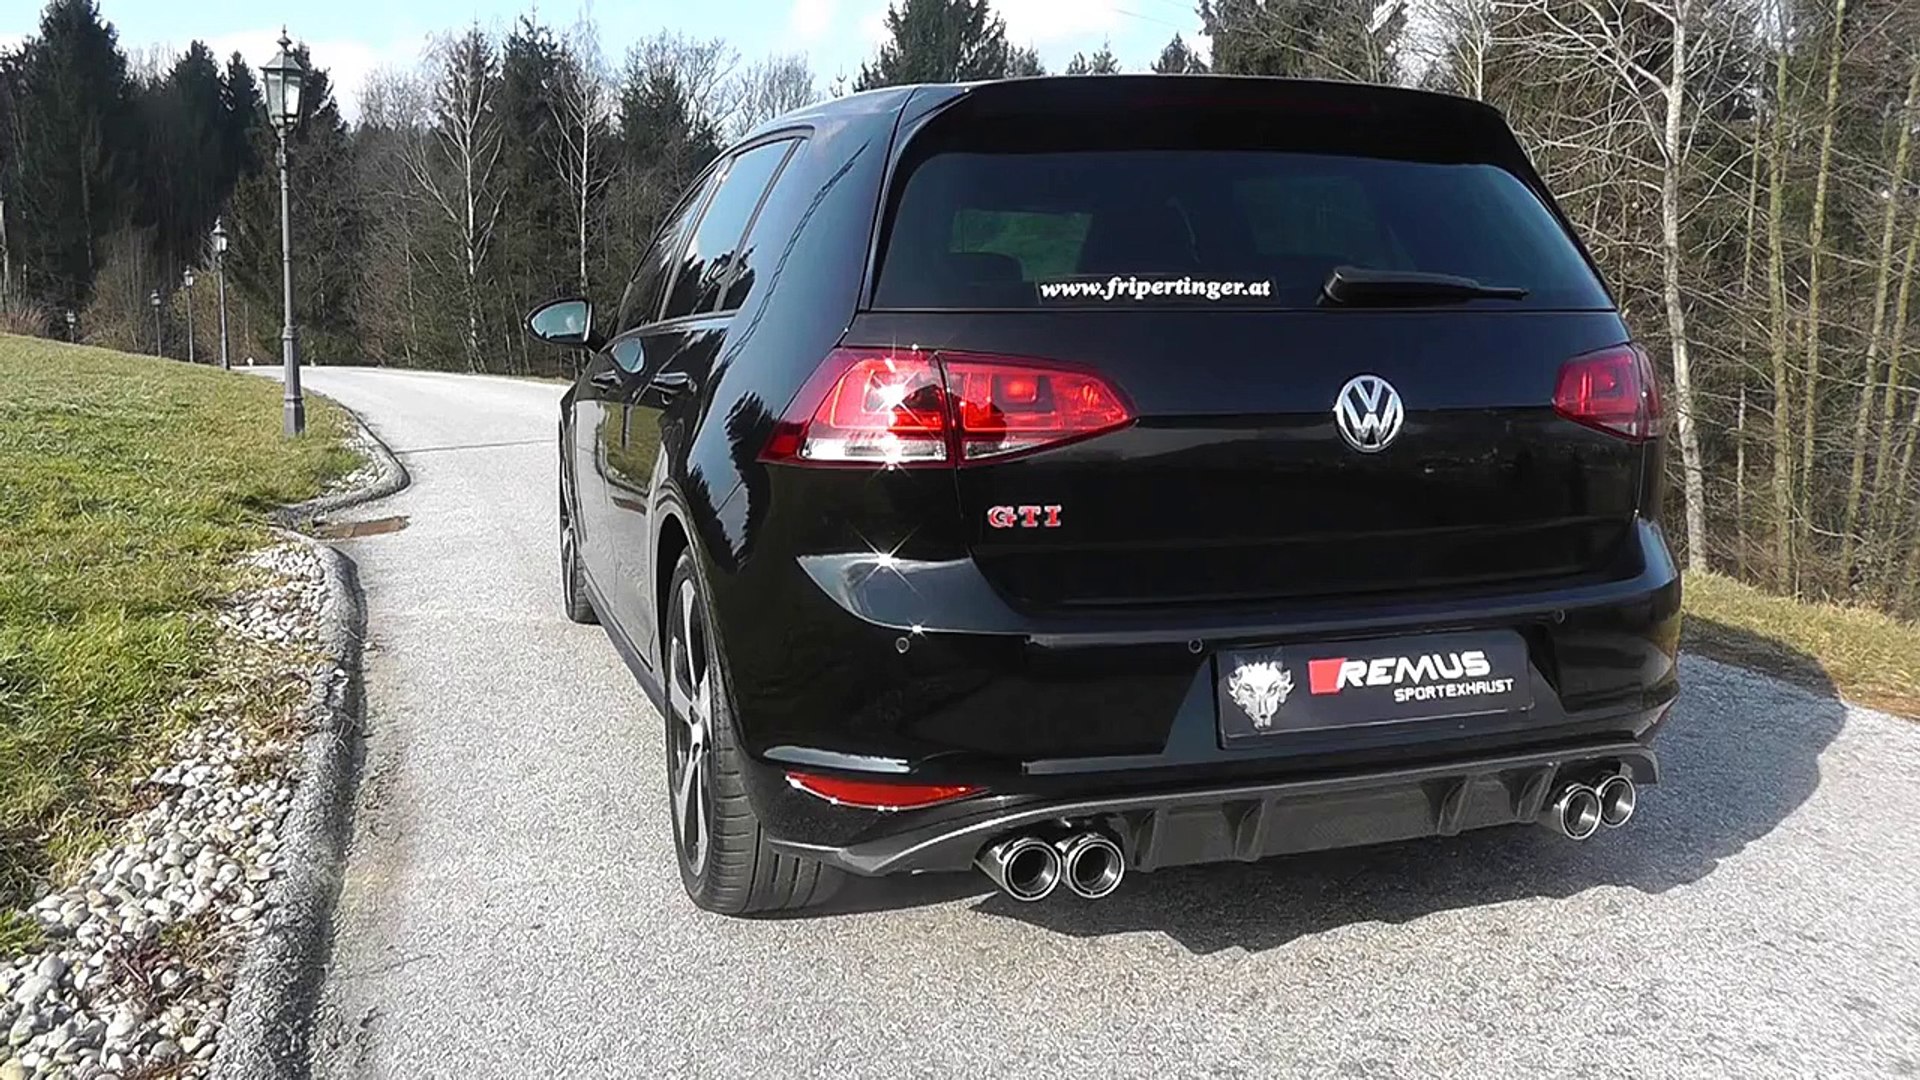 VW Golf VII GTI with REMUS cat-back system - video Dailymotion